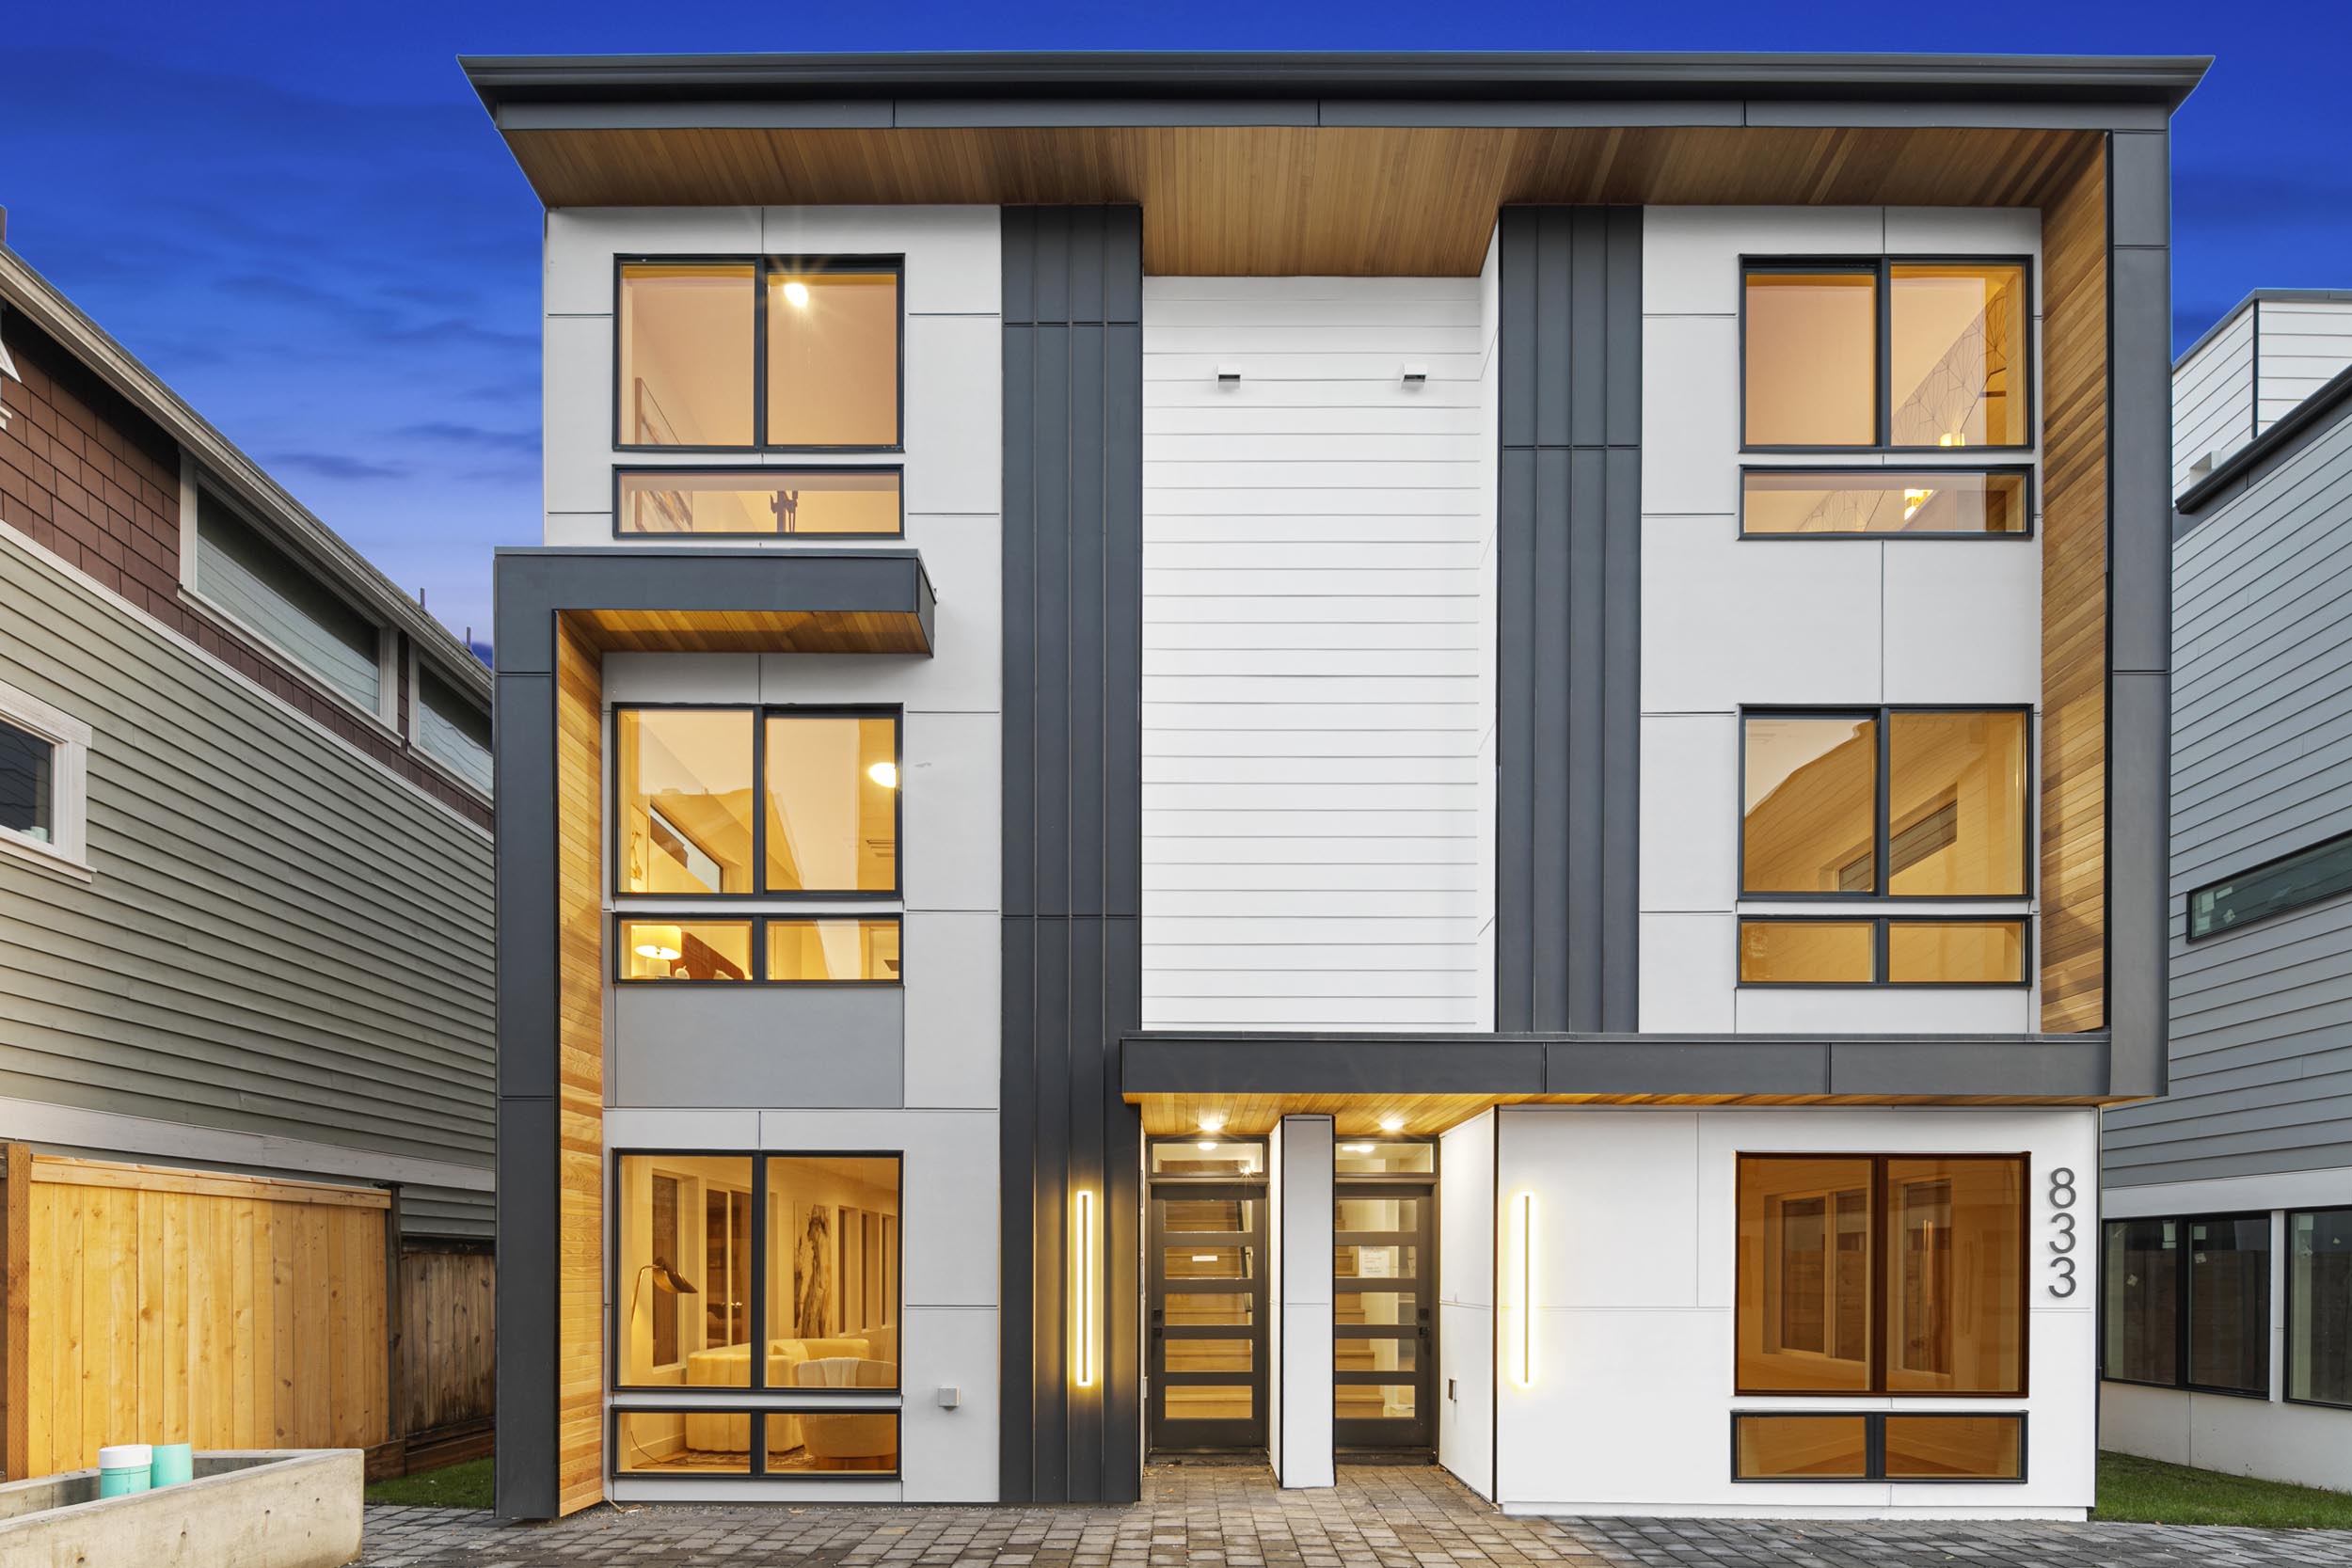 Duplex Exterior located at 833 NW 53rd St, Seattle, WA 98107